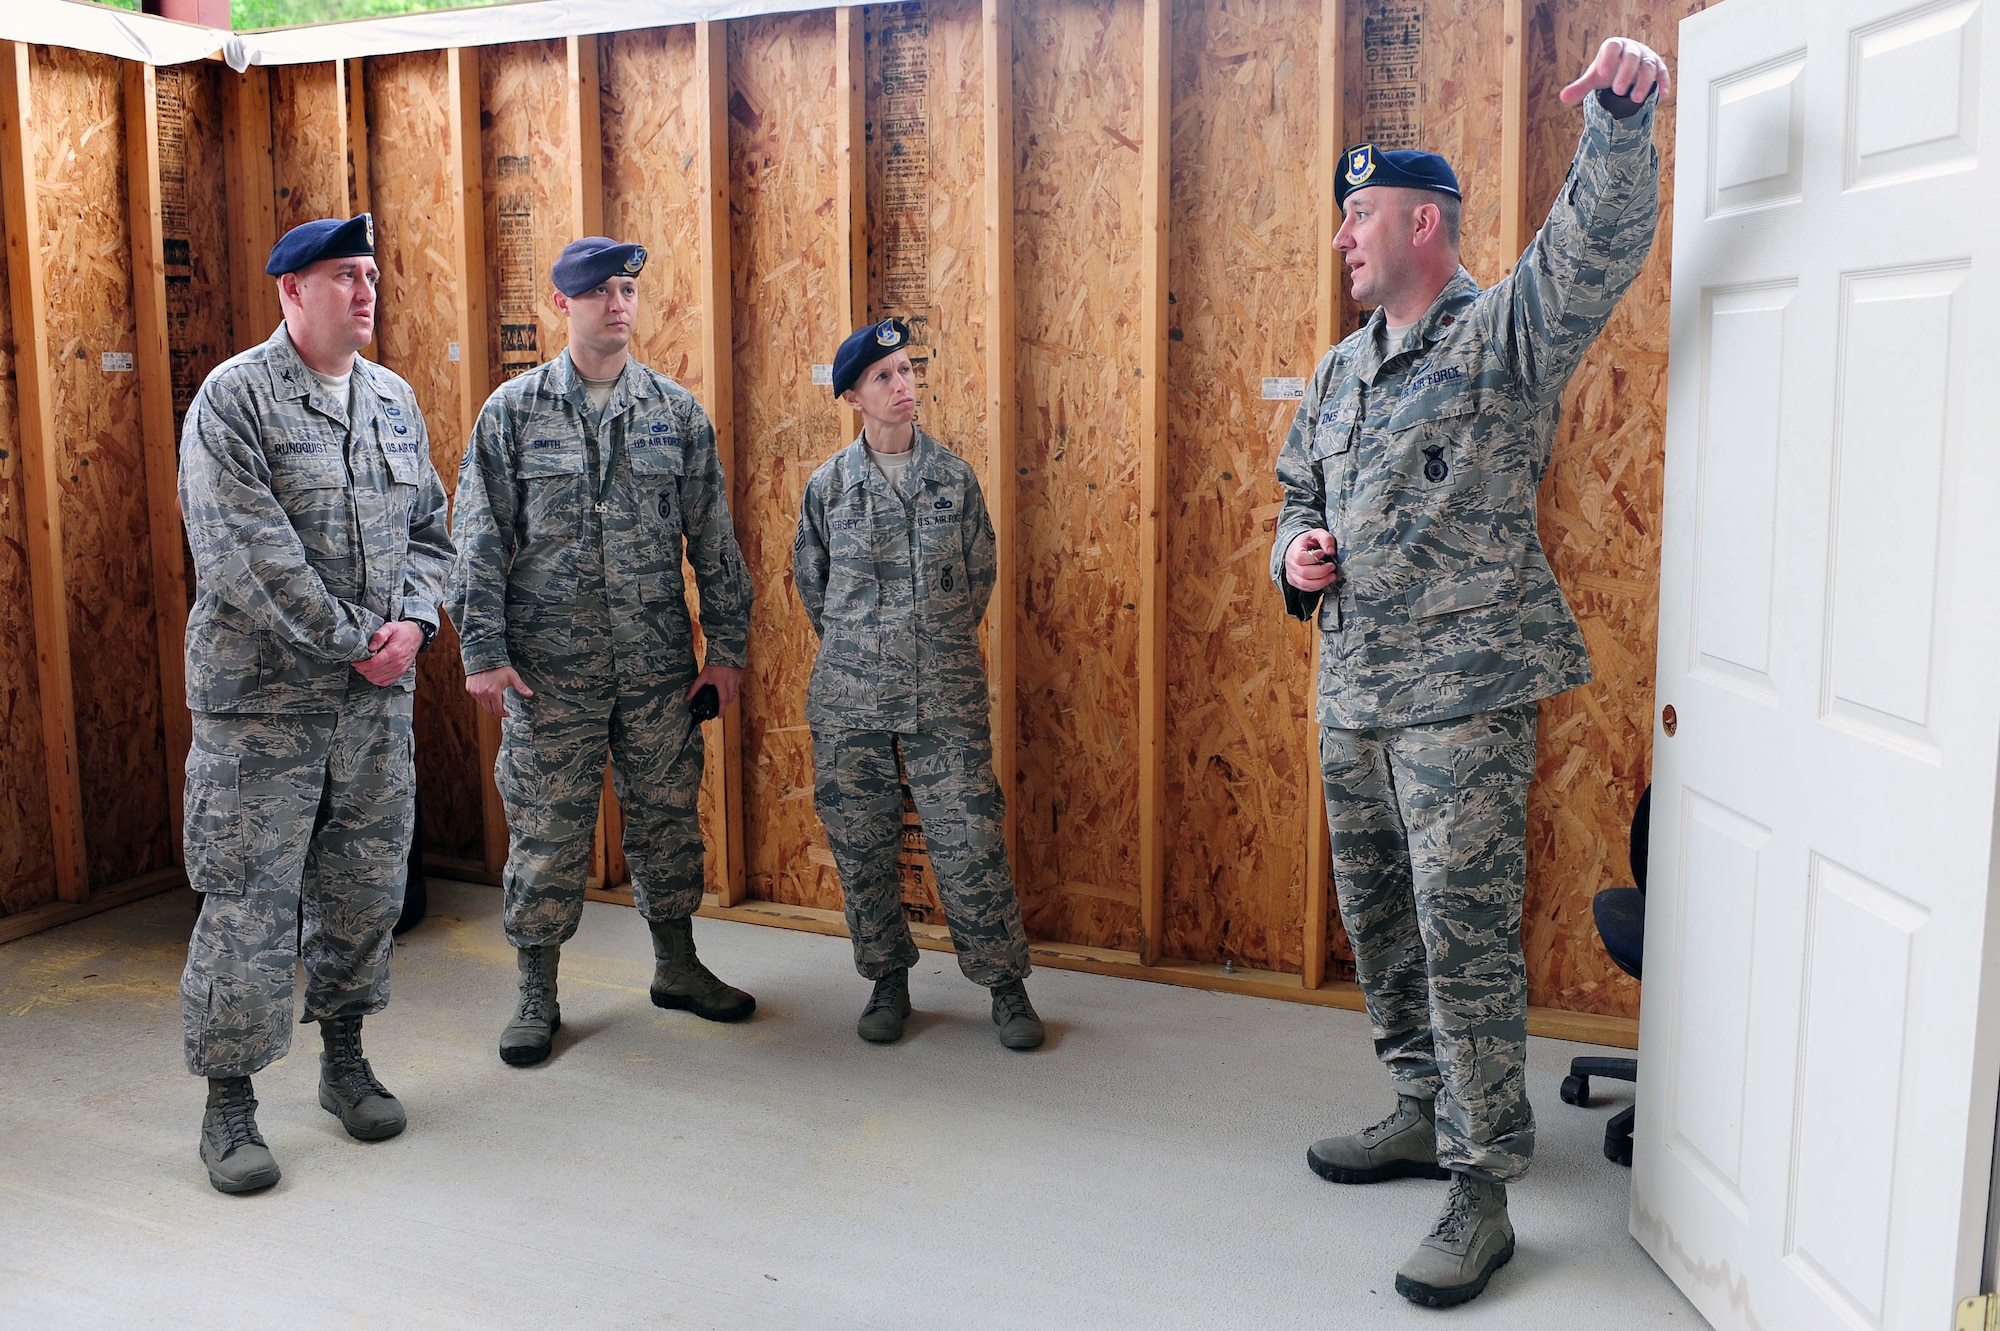 Maj. Troy Jones (right), 4th Security Forces Squadron commander, showcases the squadron’s “shoot house,” April 29, 2014, at Seymour Johnson Air Force Base, N.C. The shoot house is a training facility used by 4th SFS Airmen to hone their combat skills and tactics to prepare them for operations downrange. (U.S. Air Force photo/Senior Airman John Nieves Camacho)